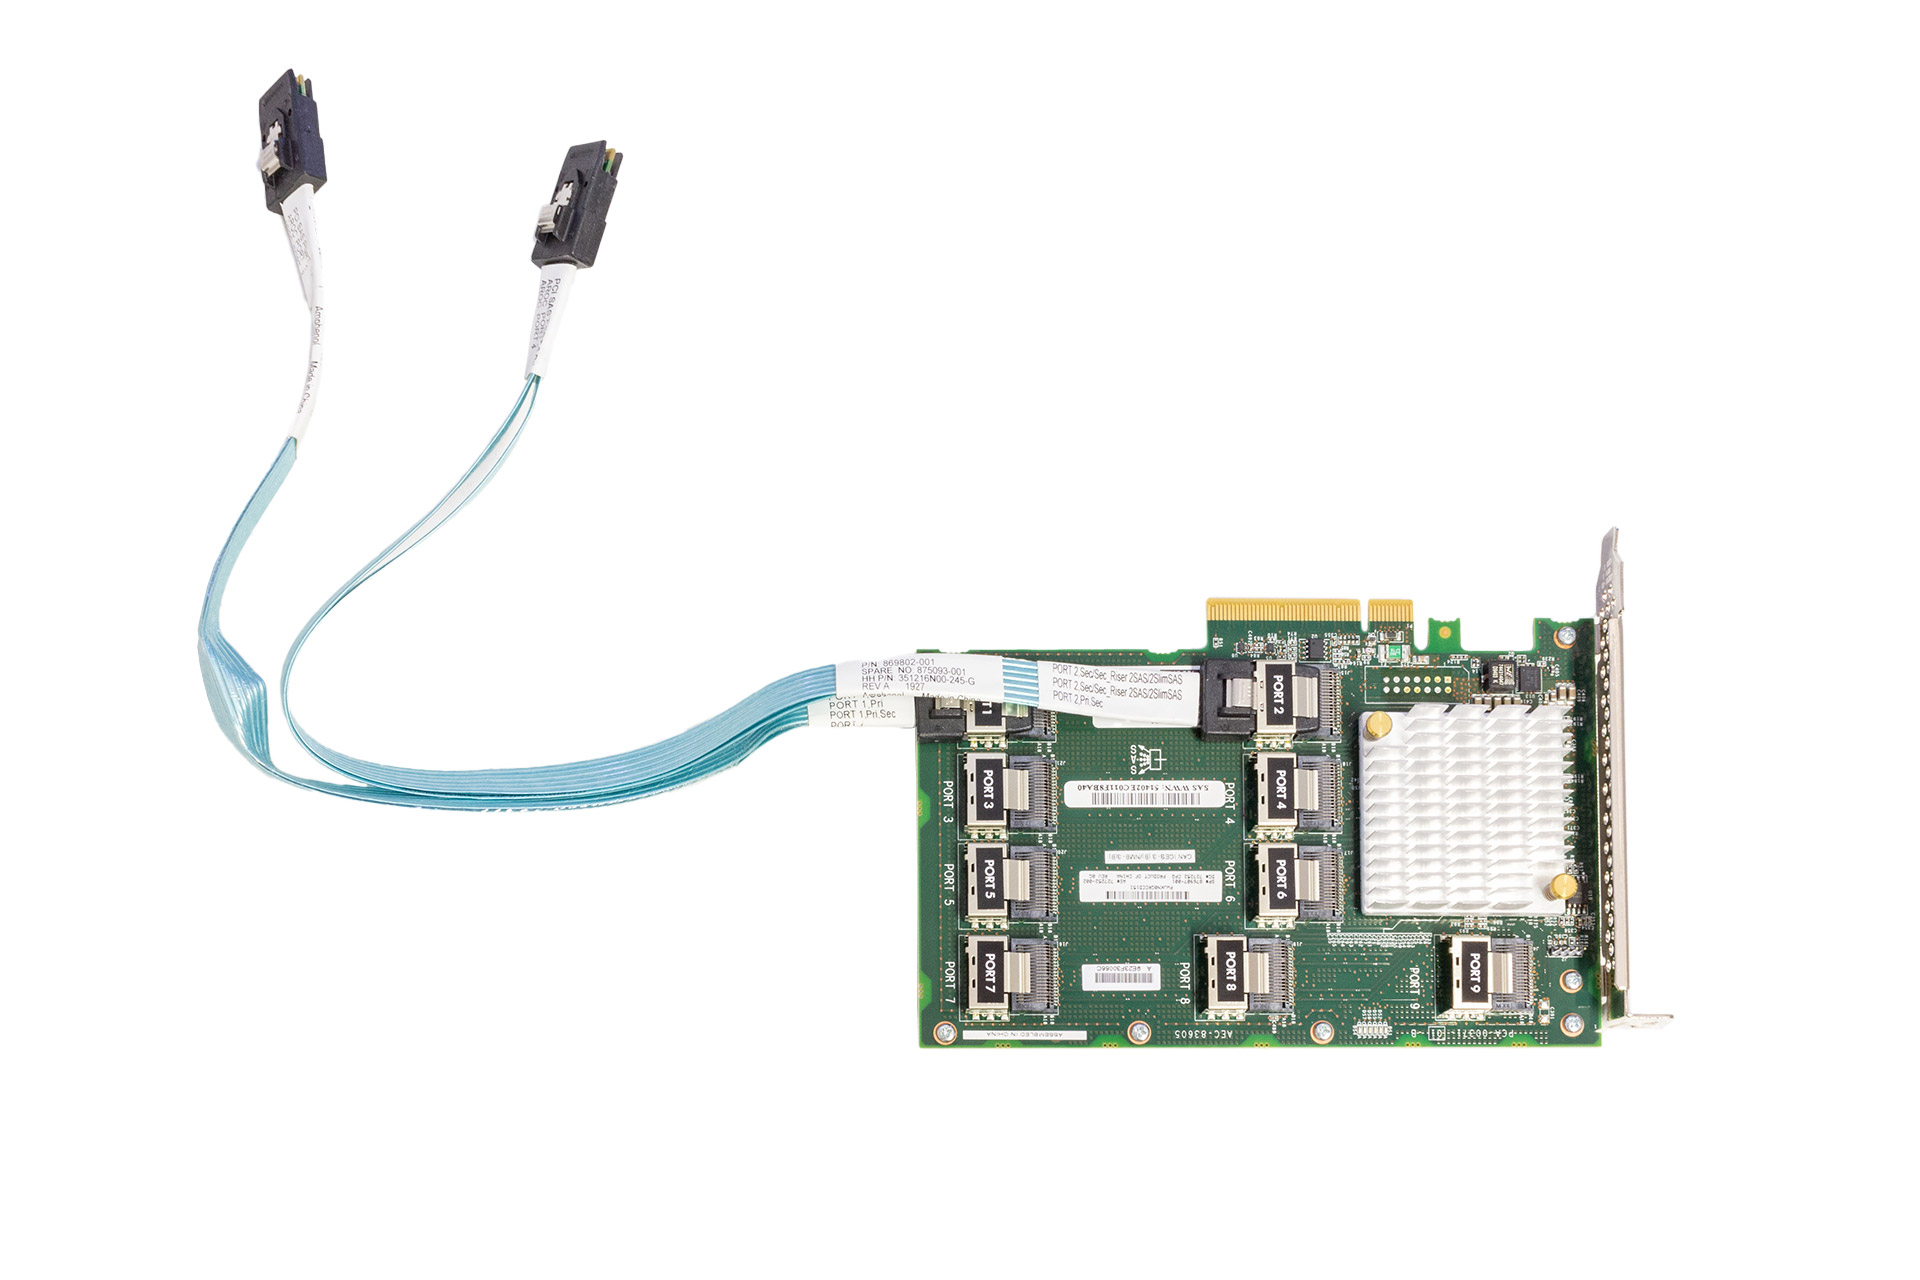 HPE SAS Expander Card 12G for DL380 Gen10 with cables